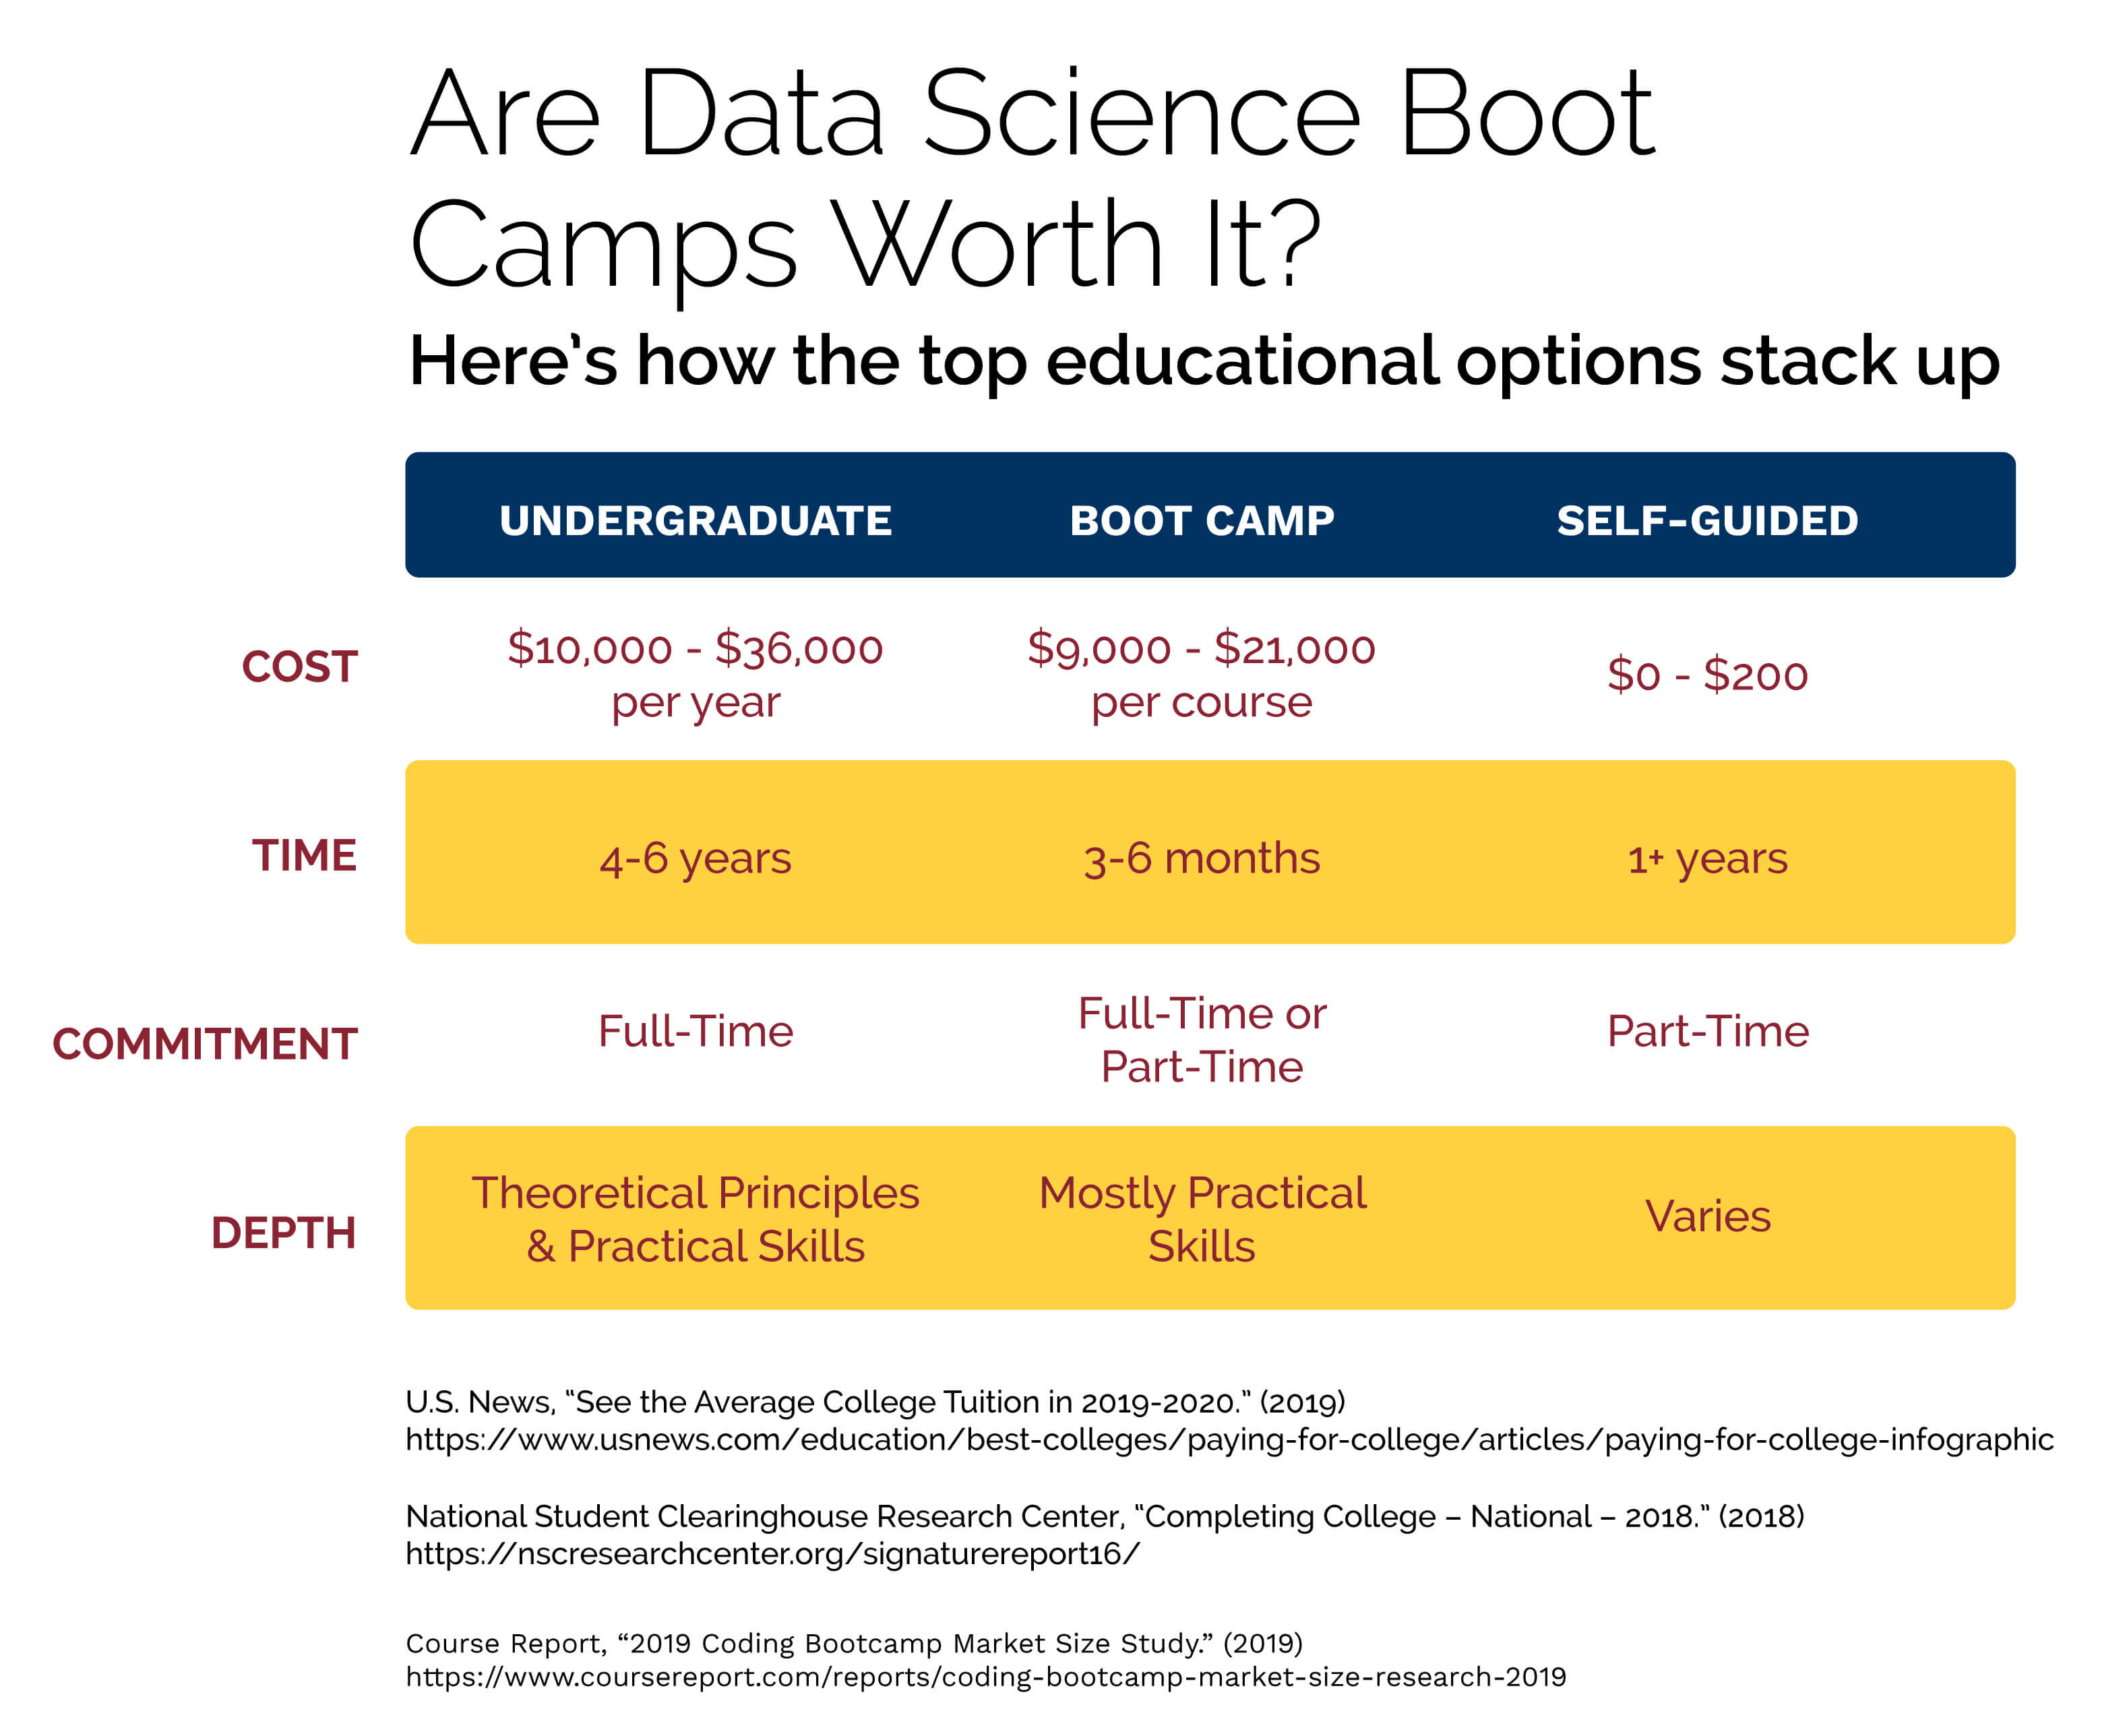 A chart that shows how data science boot camps compare to other educational options